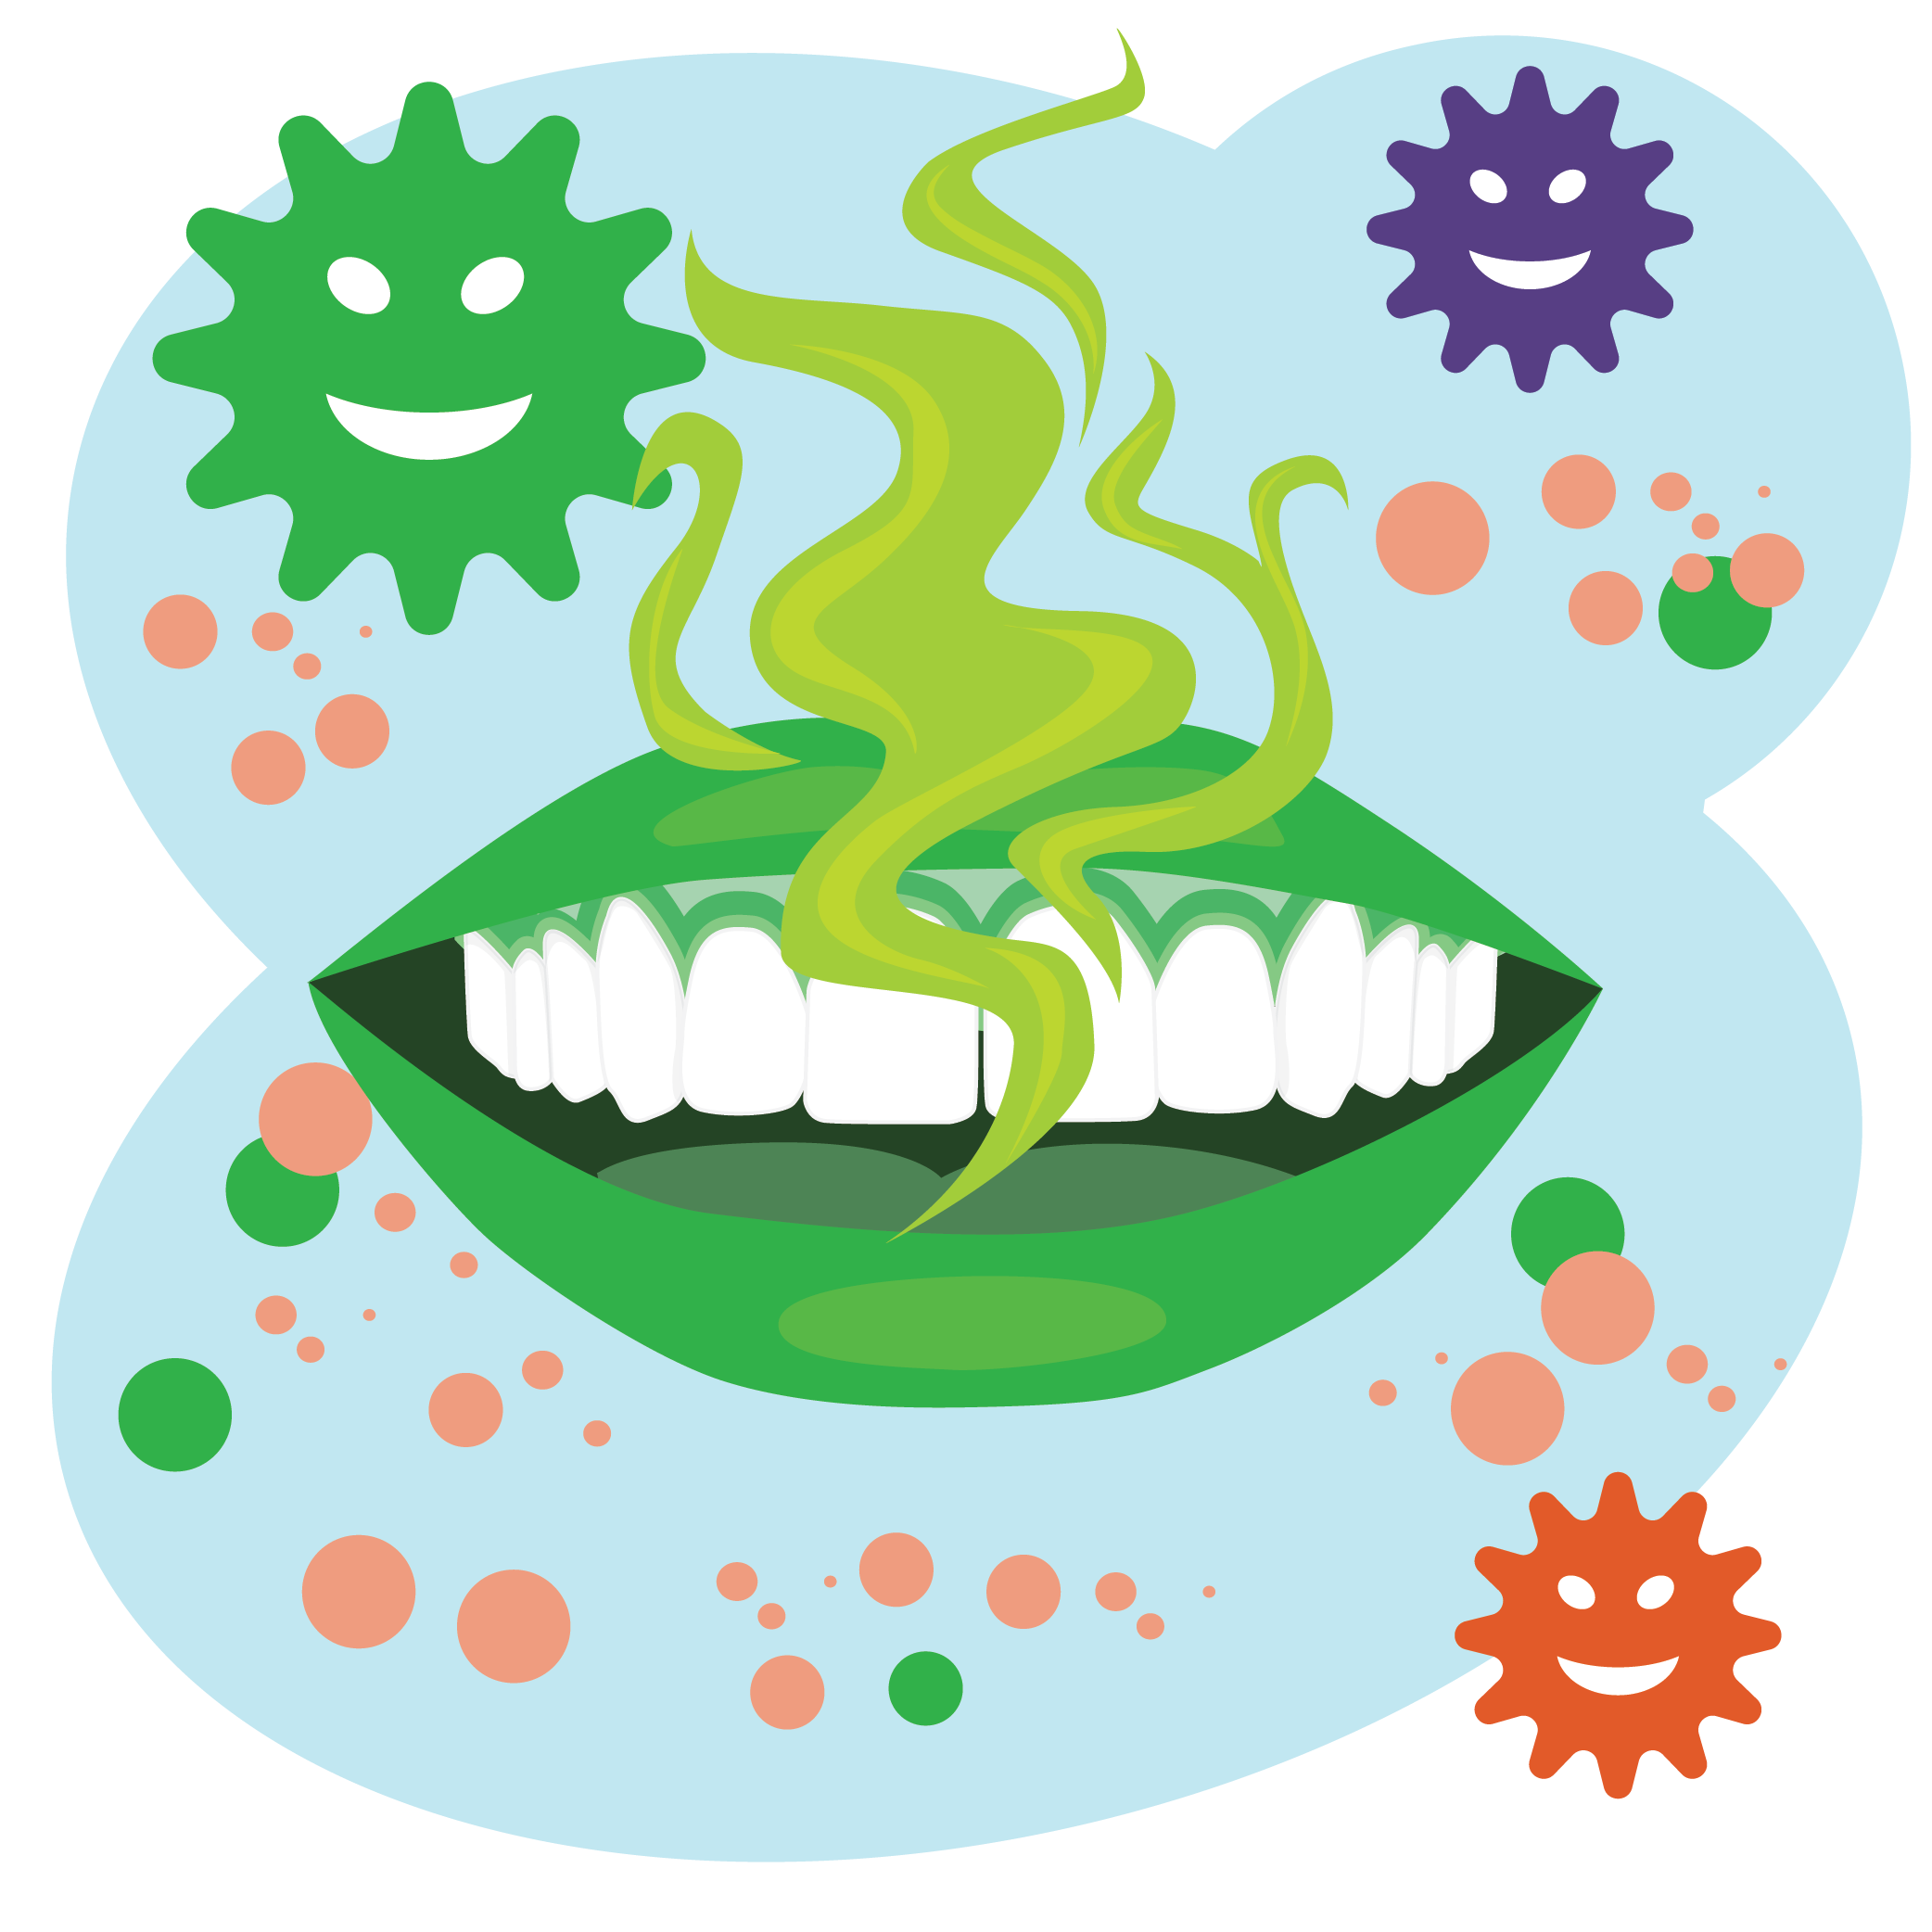 Illustration of a mouth with green swirls to indicate odor and bacteria to indicate germs that cause bad breath.